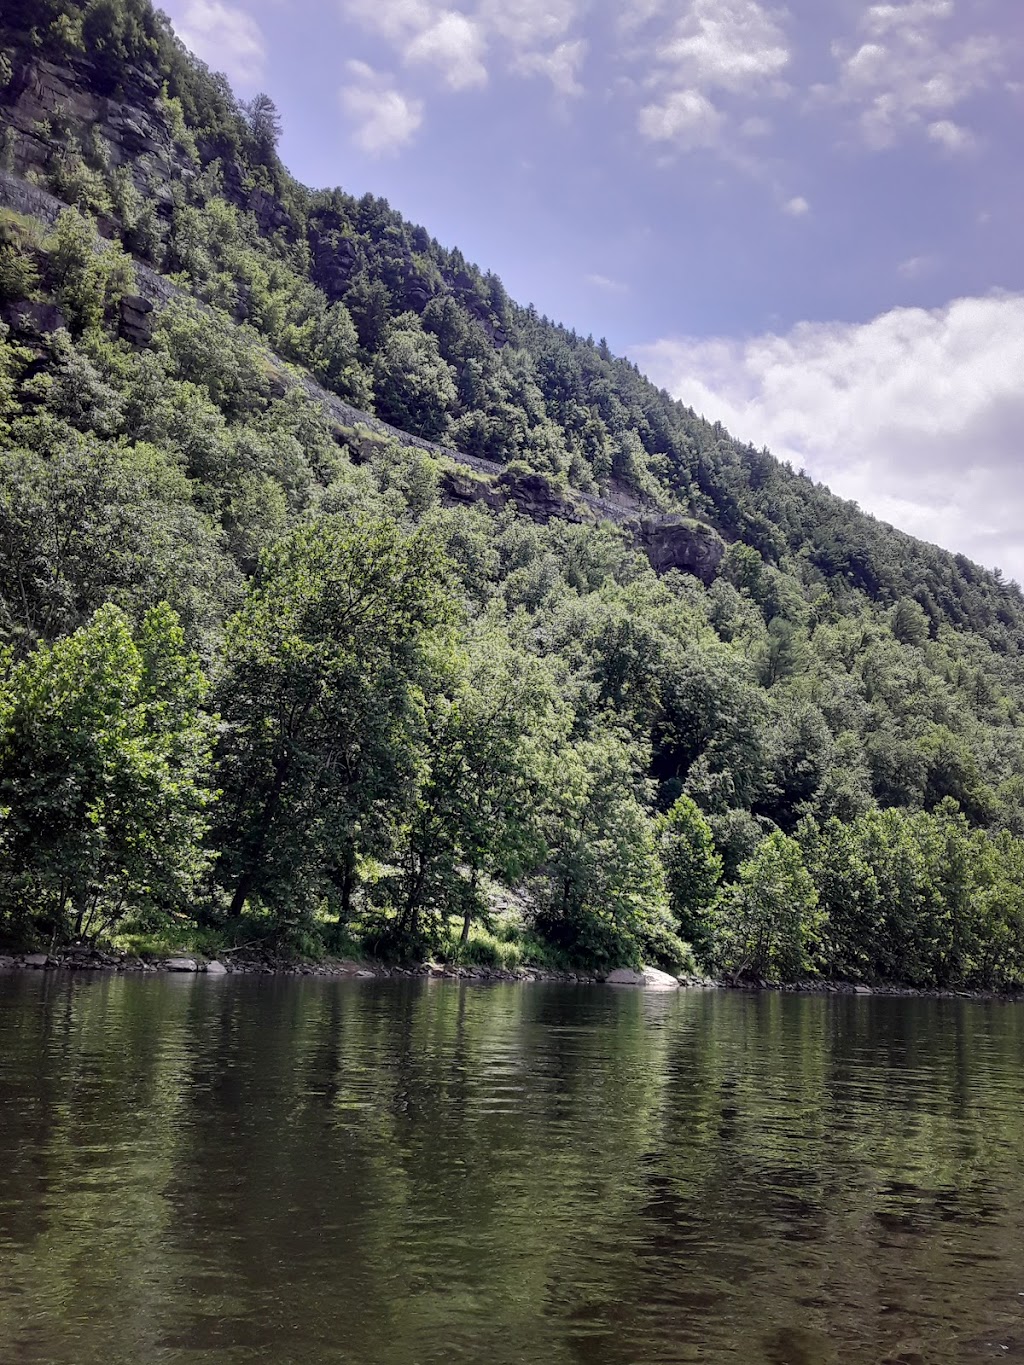 Upper Delaware Scenic and Recreational River | 274 River Rd, Beach Lake, PA 18405 | Phone: (570) 729-7134